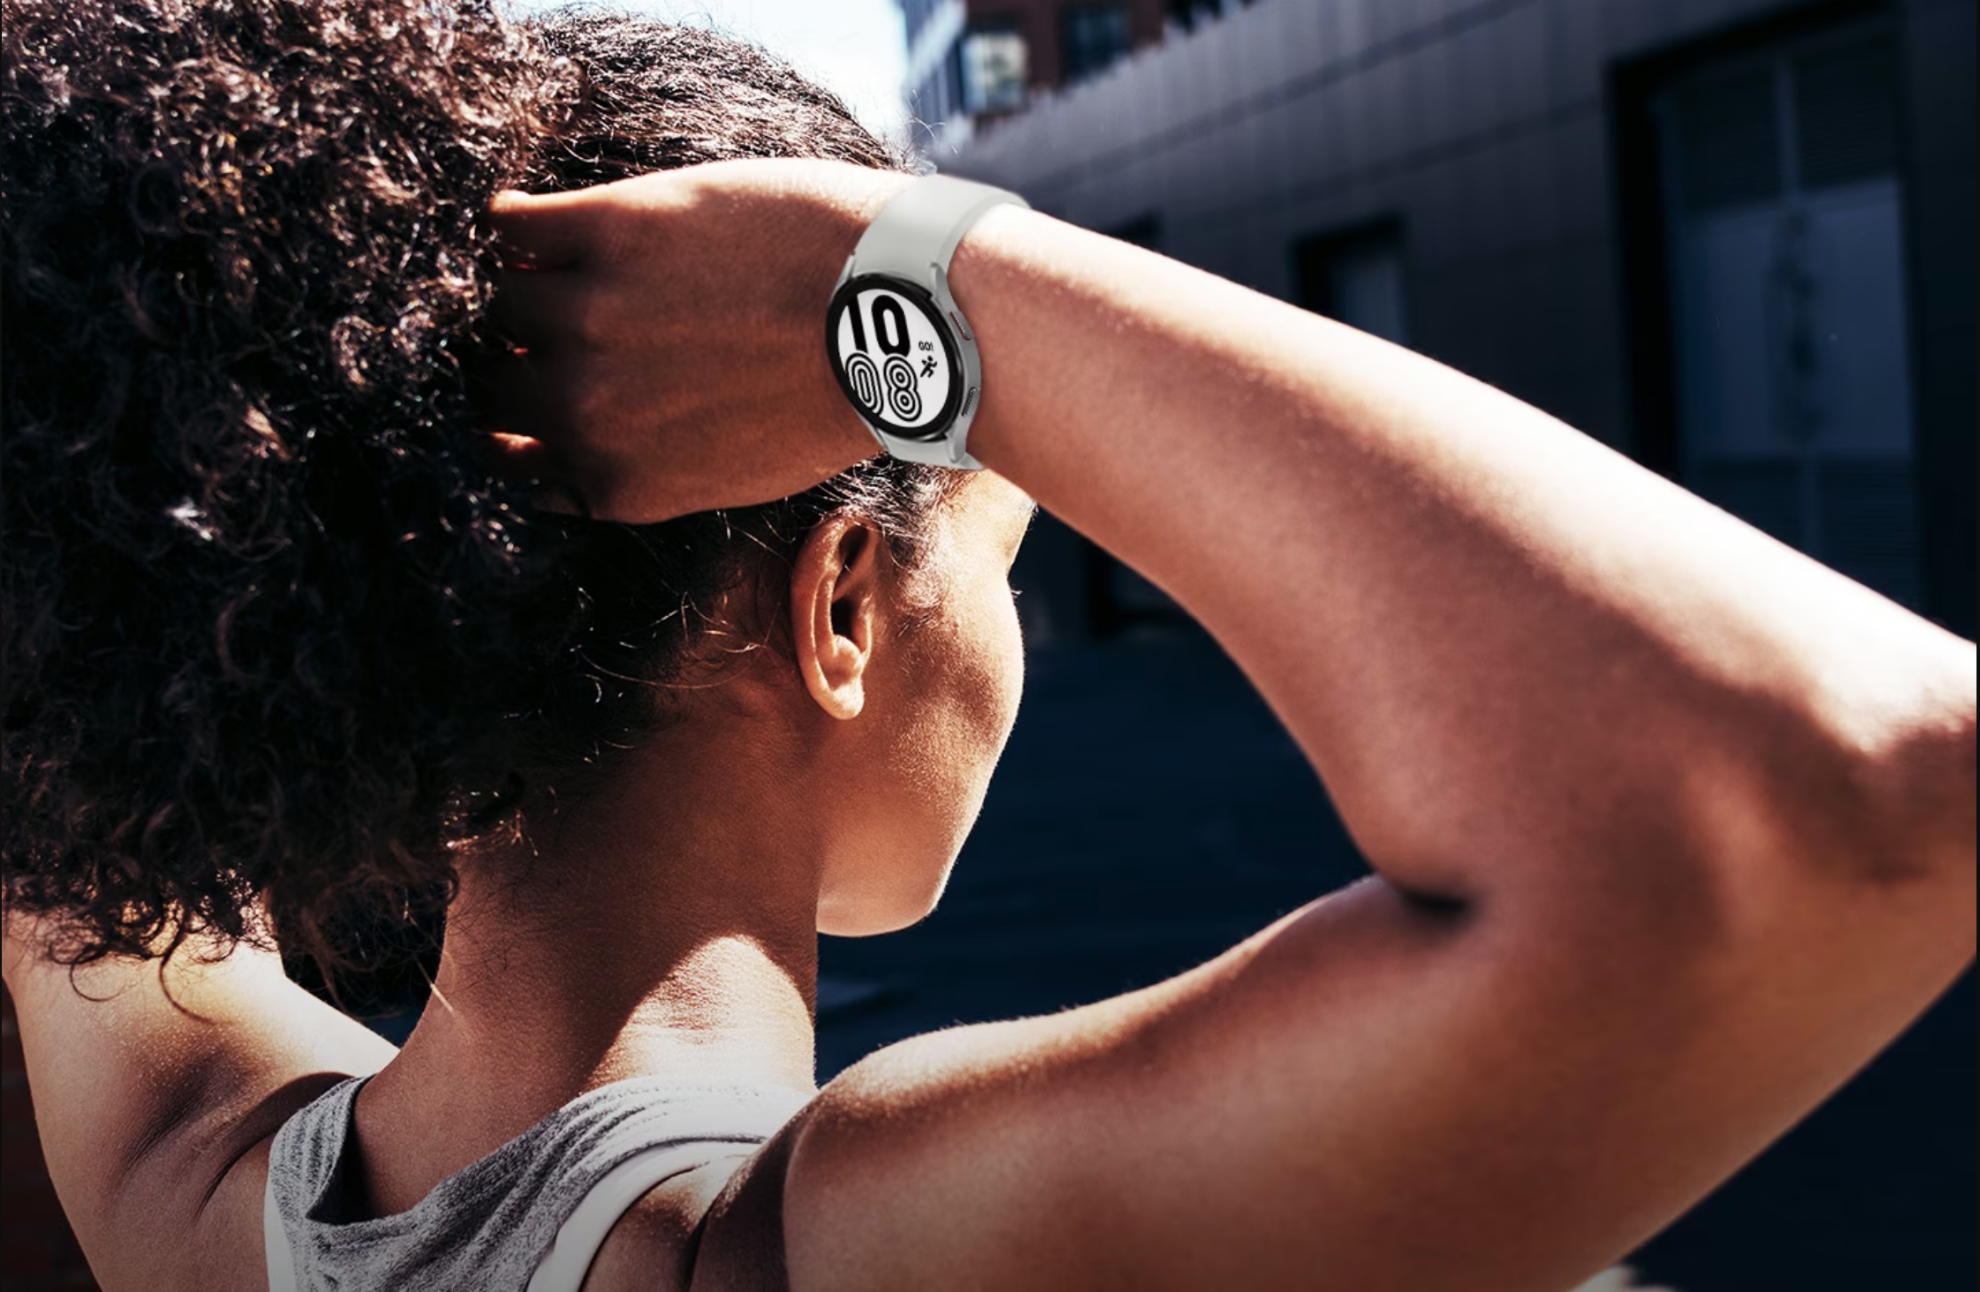 There is a woman outside wearing workout clothes and raising her hands to tie her hair. She is wearing a Galaxy Watch4 with a Silver color sport band. The watch is displaying the time and a UI icon with a running symbol that says †GO!' above.